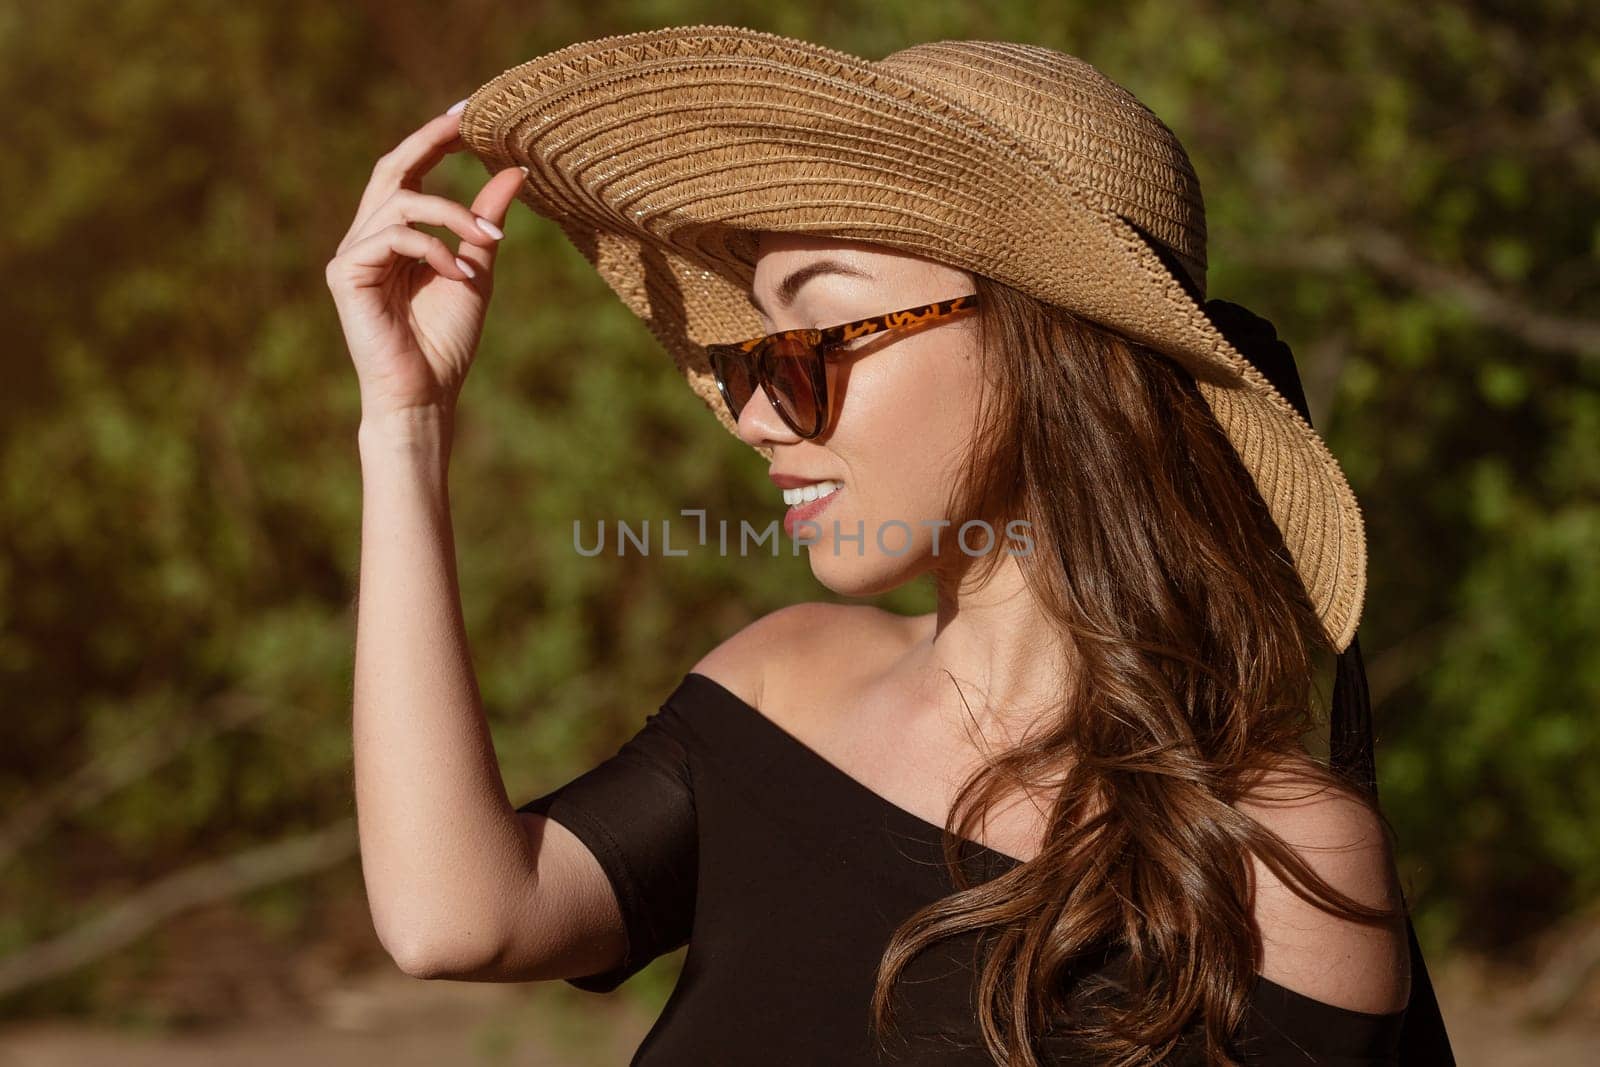 Close-up portrait of a woman in a hat from the sun on a summer sunny day. Beautiful caucasian young woman posing in sunglasses outdoors in the afternoon cute smiling